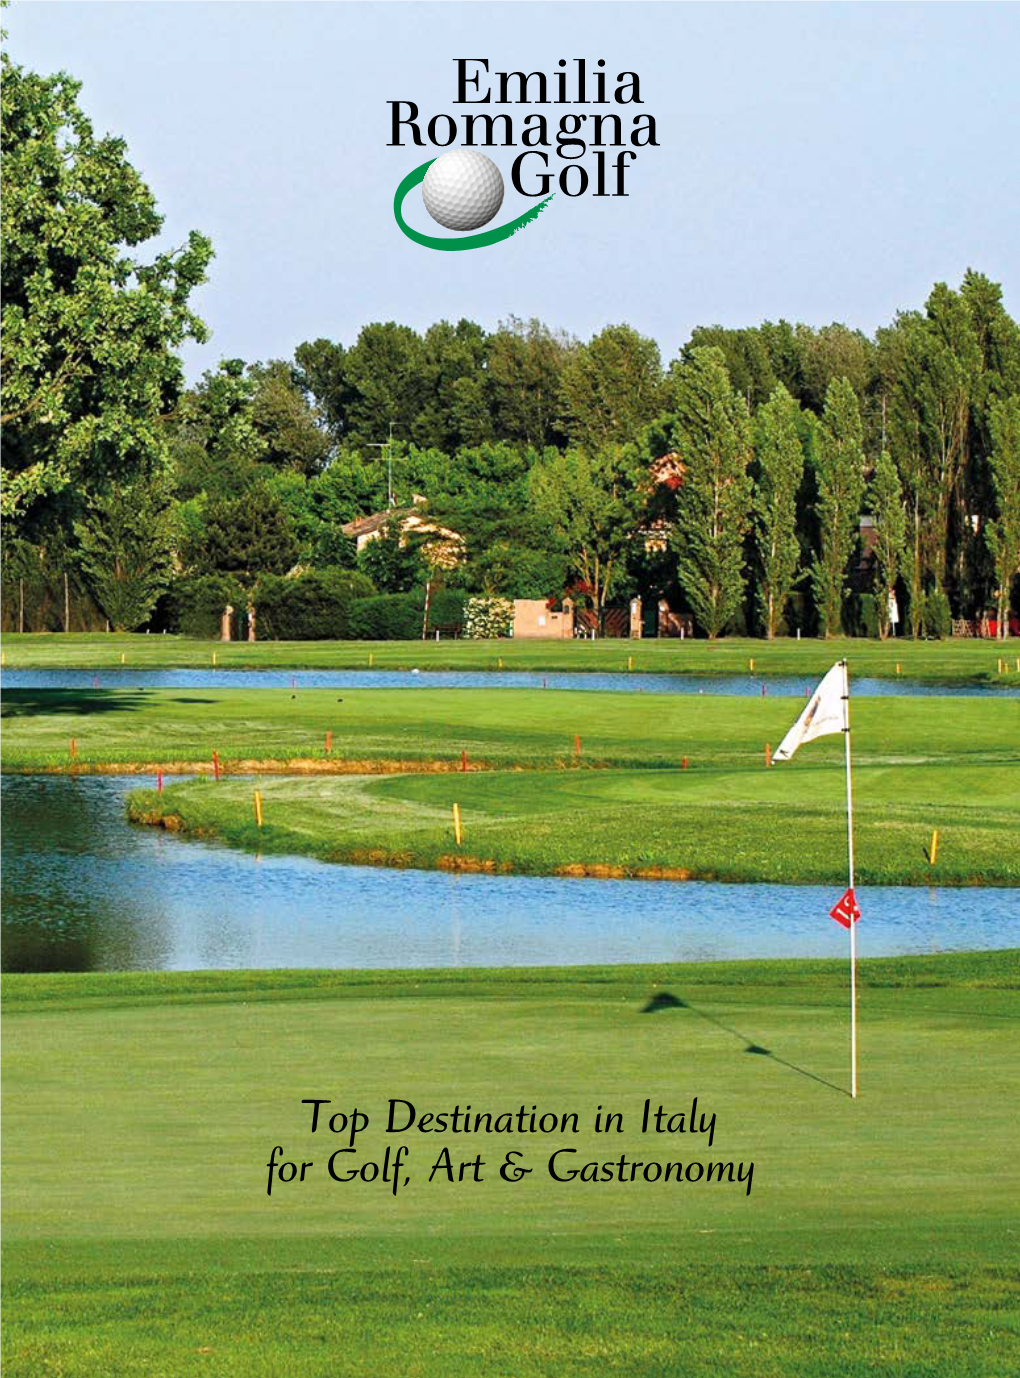 Top Destination in Italy for Golf, Art & Gastronomy